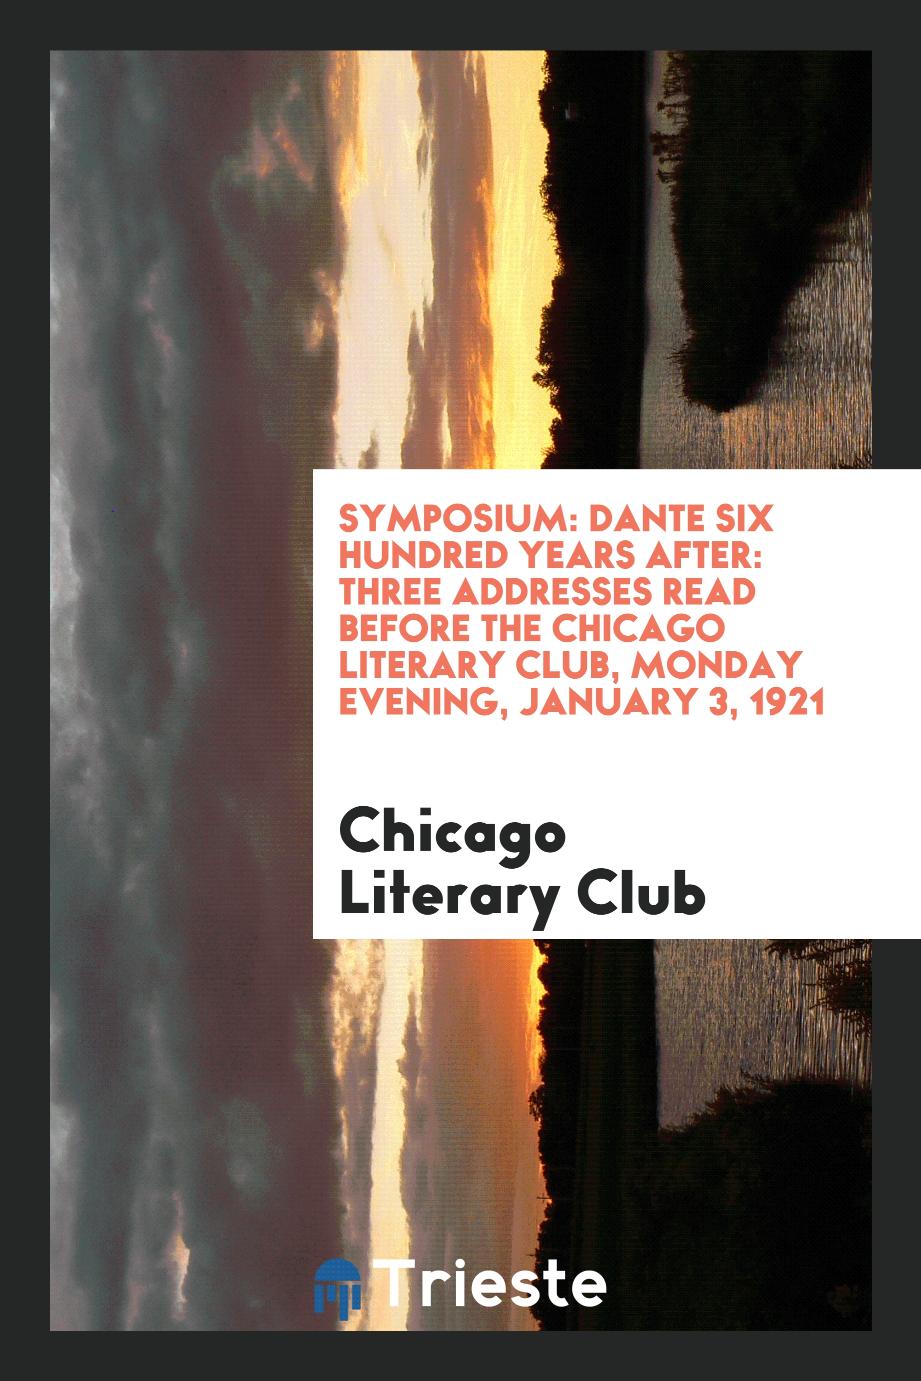 Symposium: Dante Six Hundred Years After: Three Addresses Read Before the Chicago Literary Club, Monday Evening, January 3, 1921